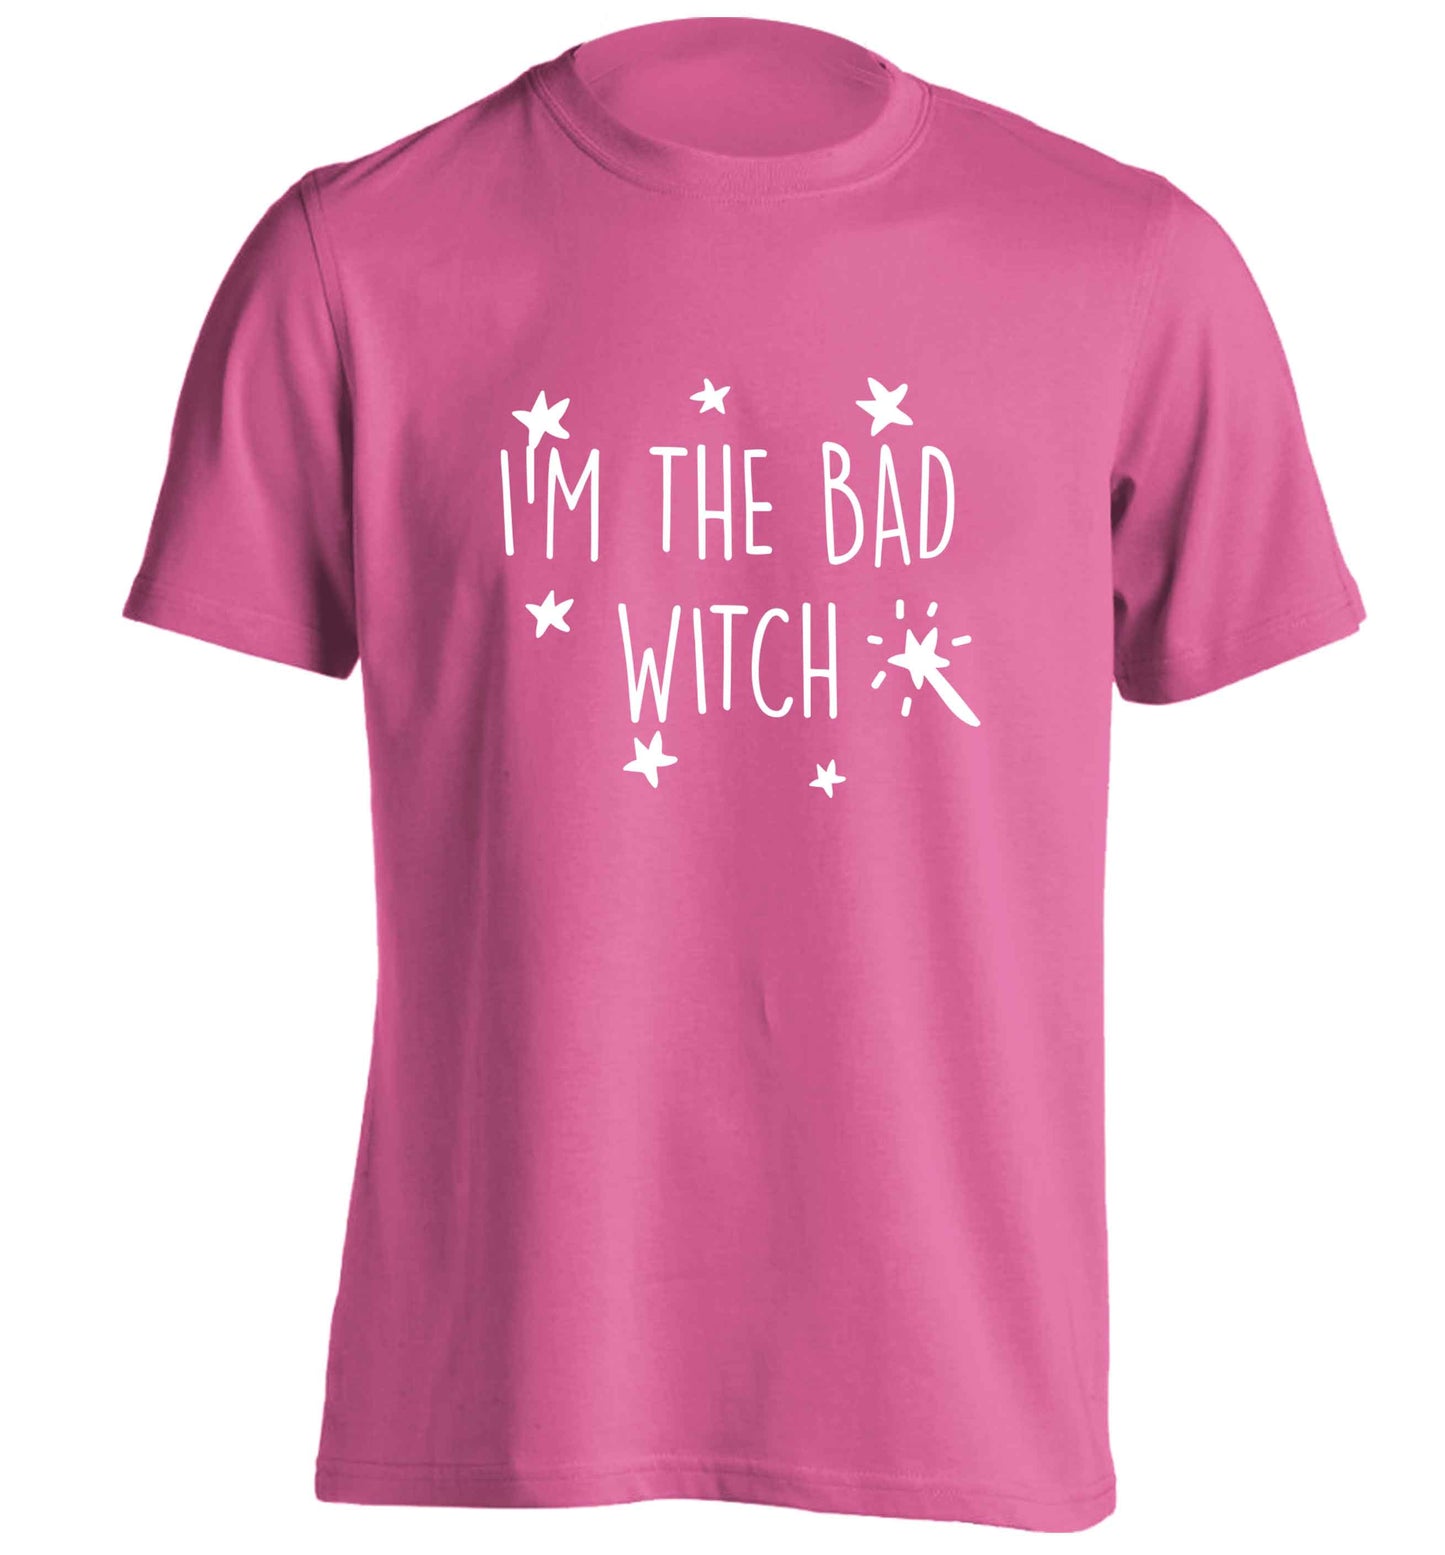 Bad witch adults unisex pink Tshirt 2XL